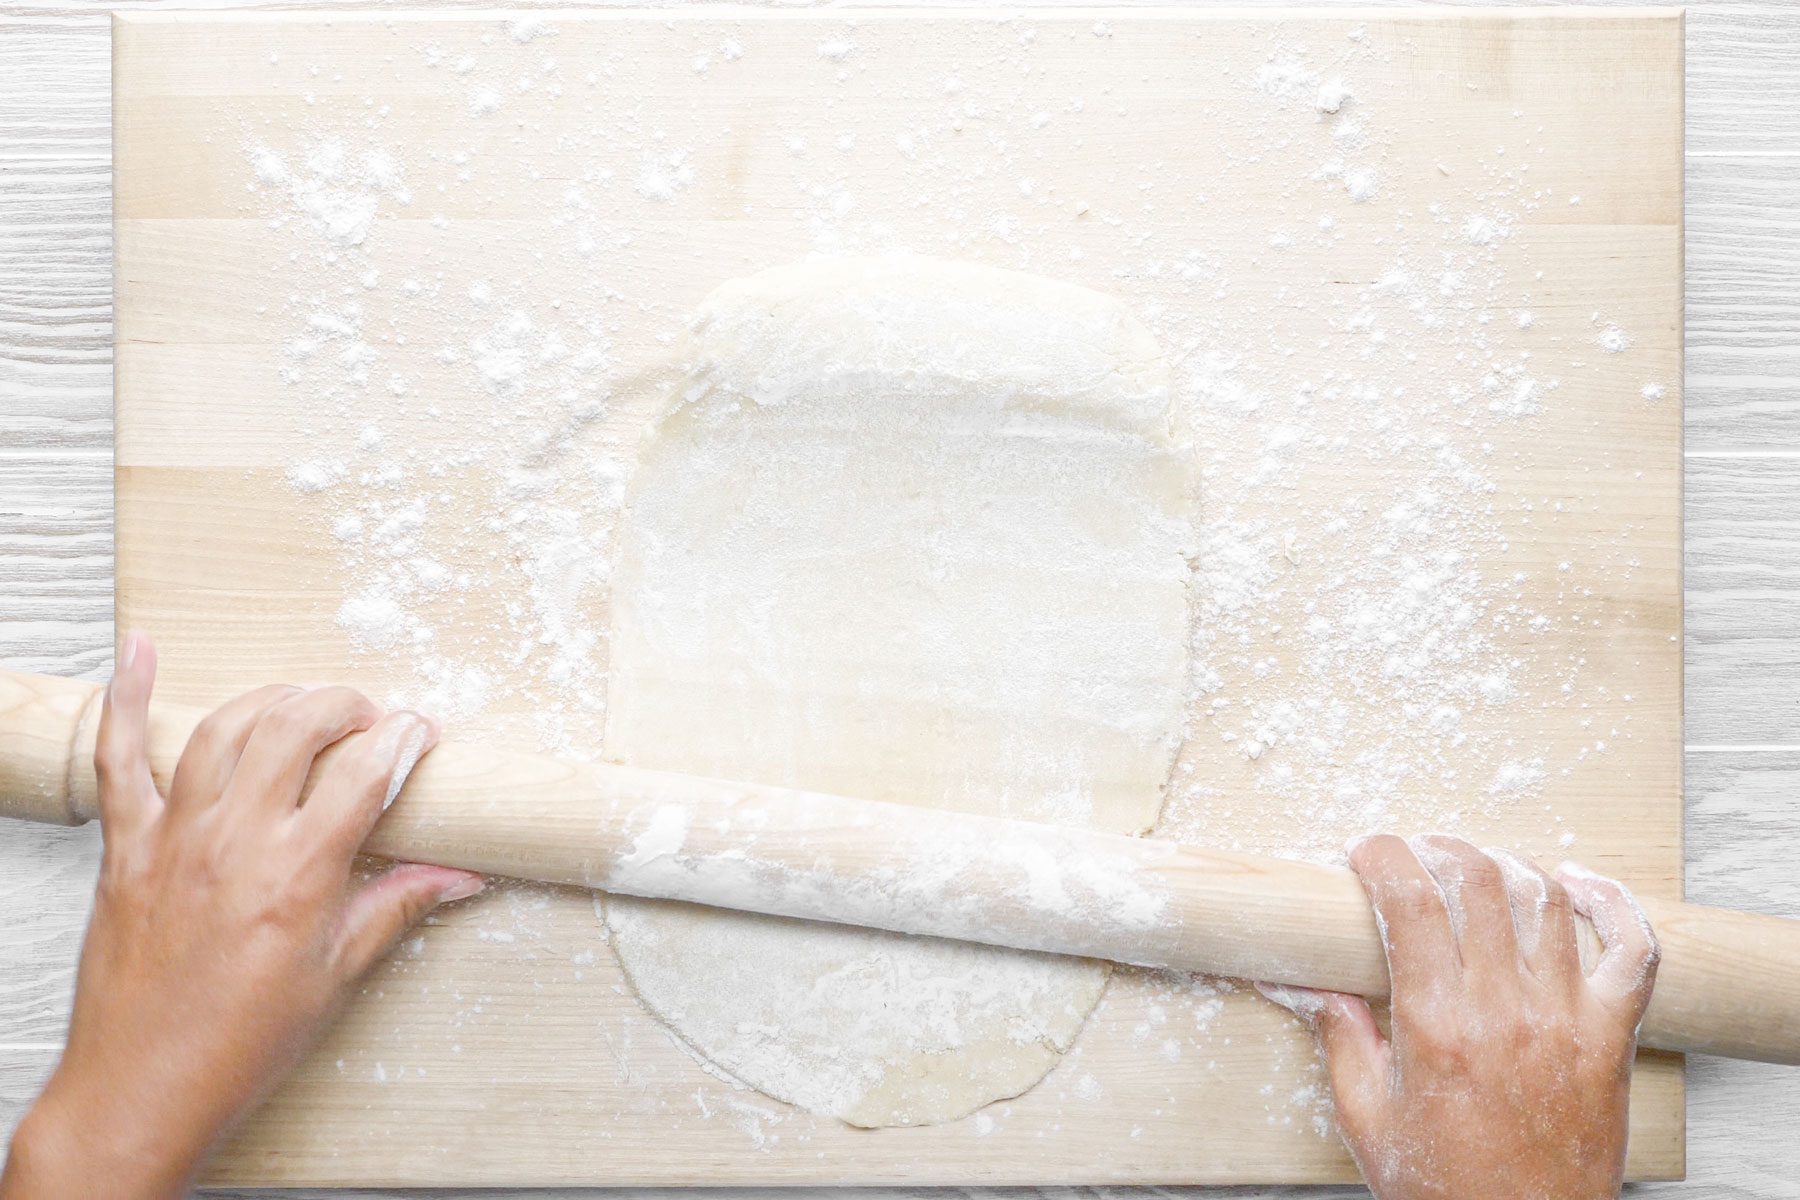 A person rolling the dough ightly floured surface